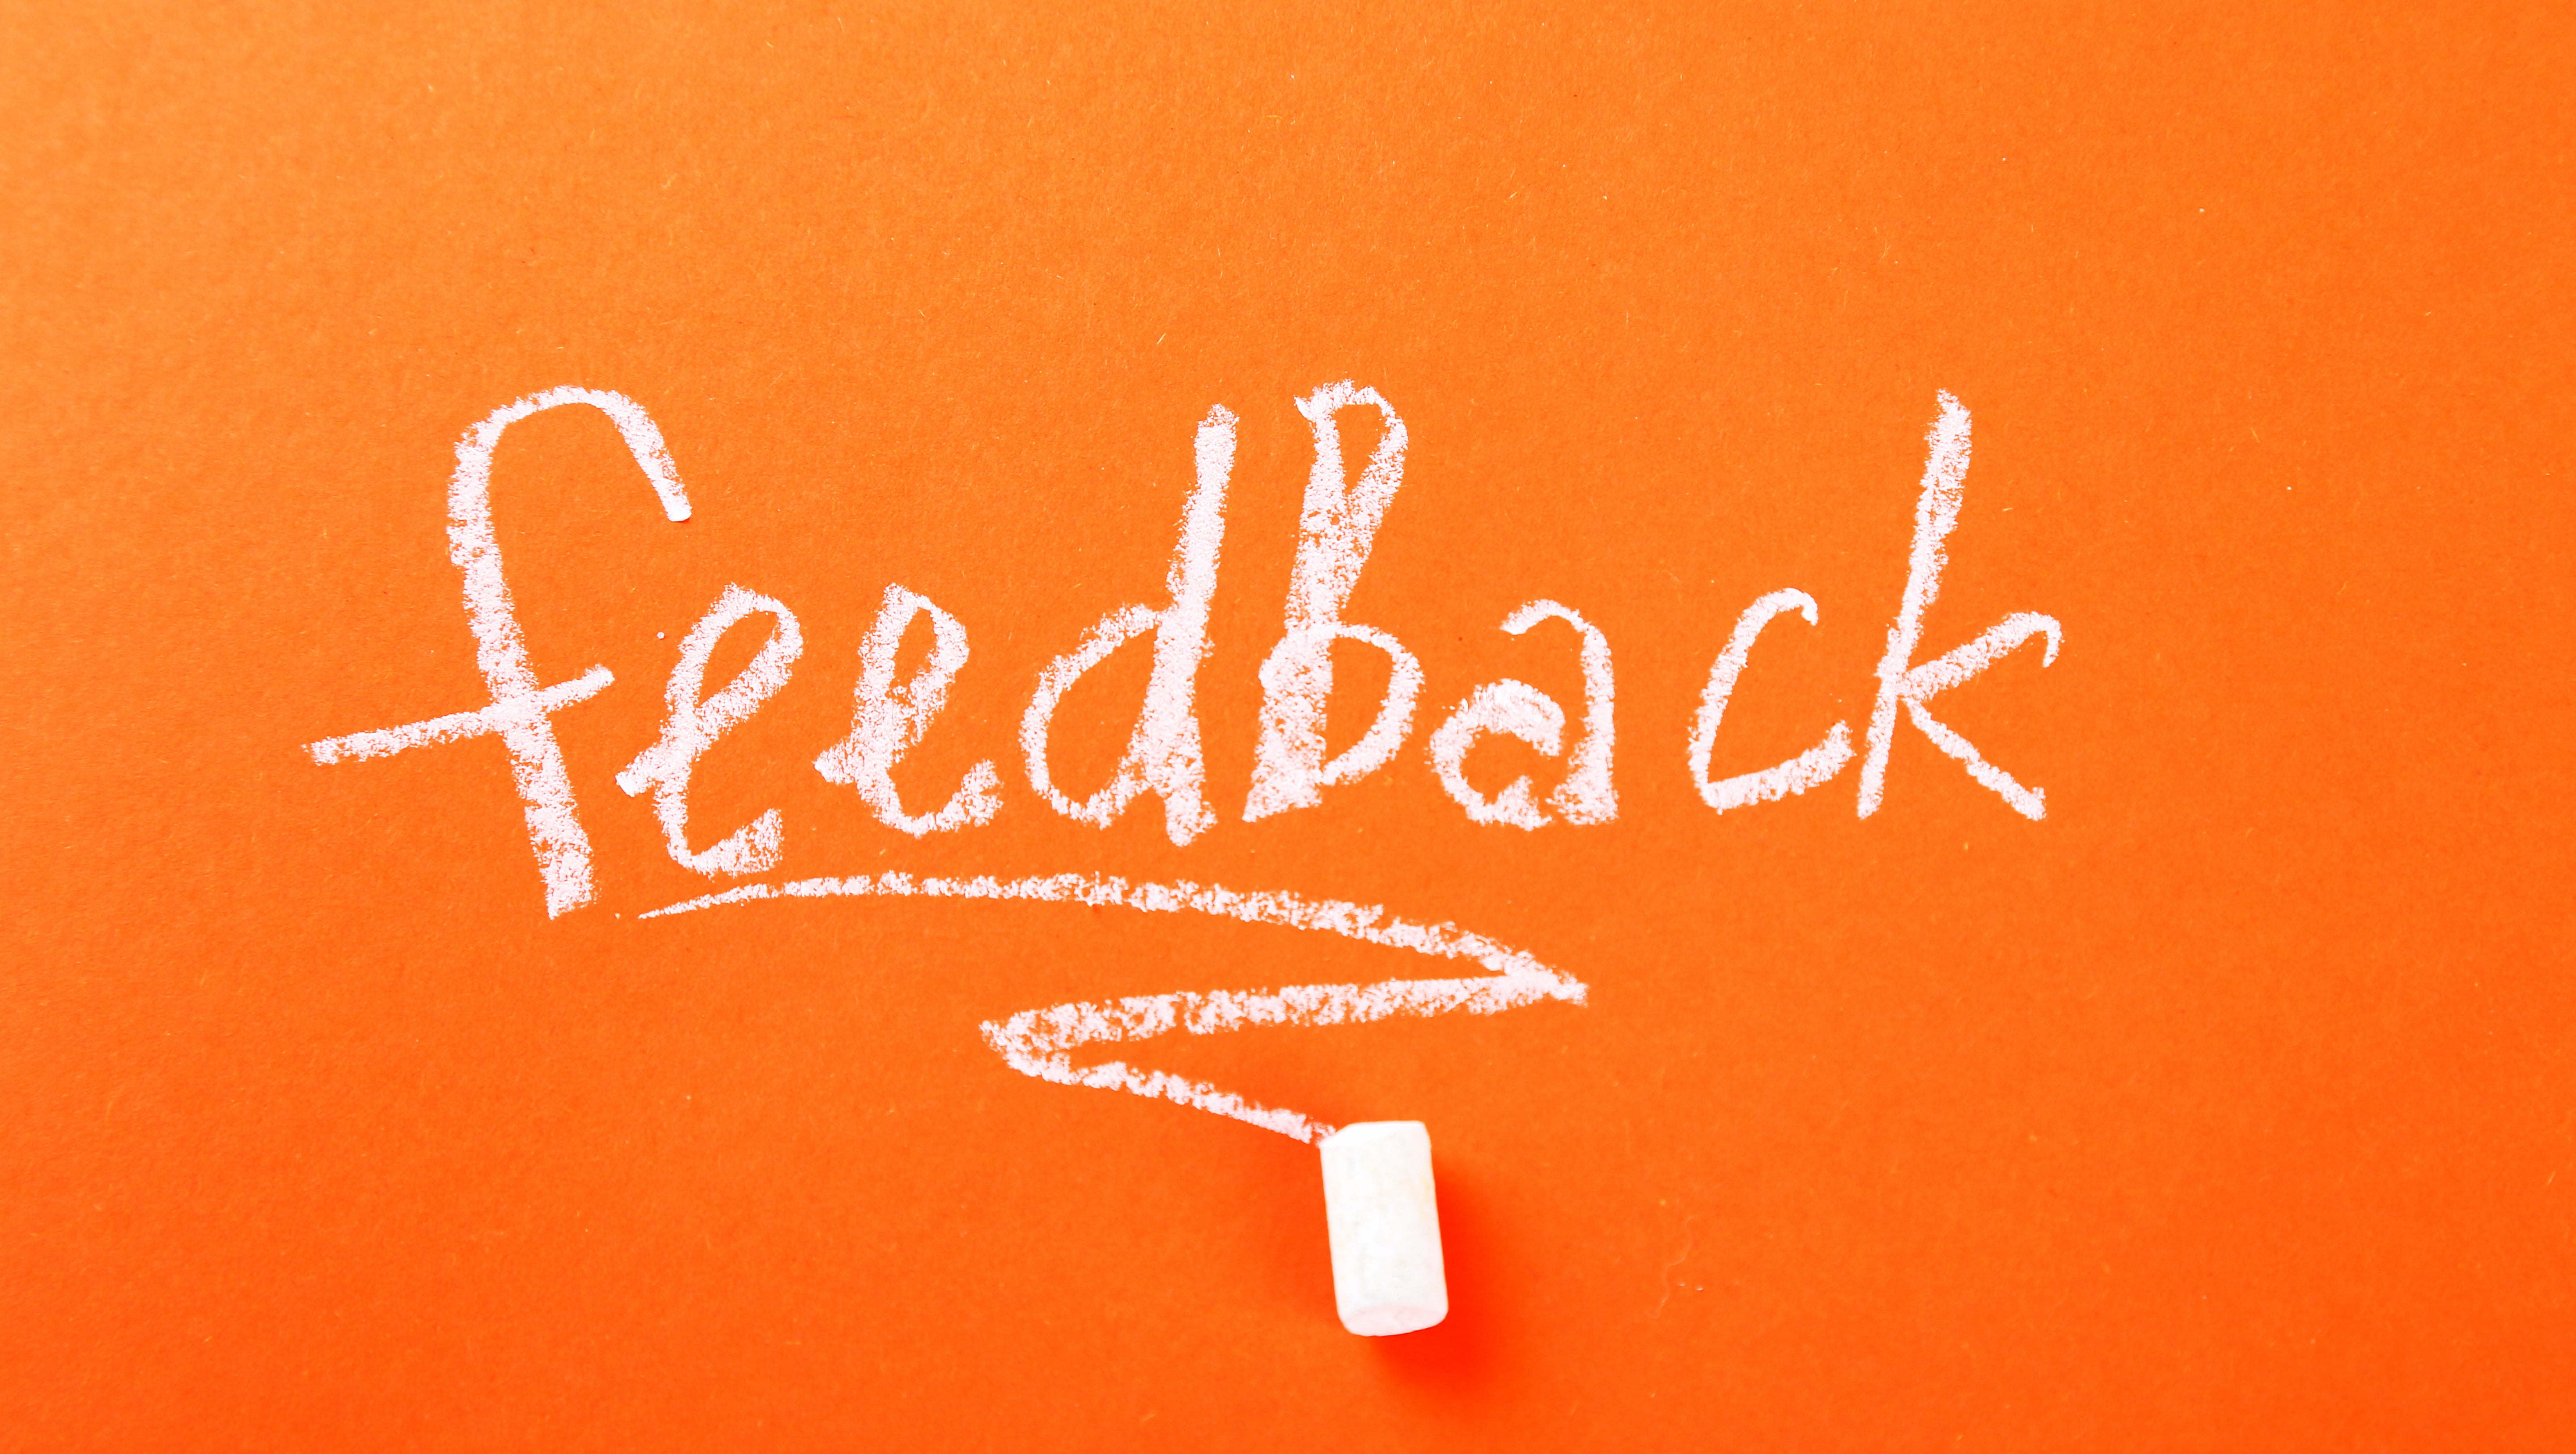 <b>The Opportunity for Feedback</b>